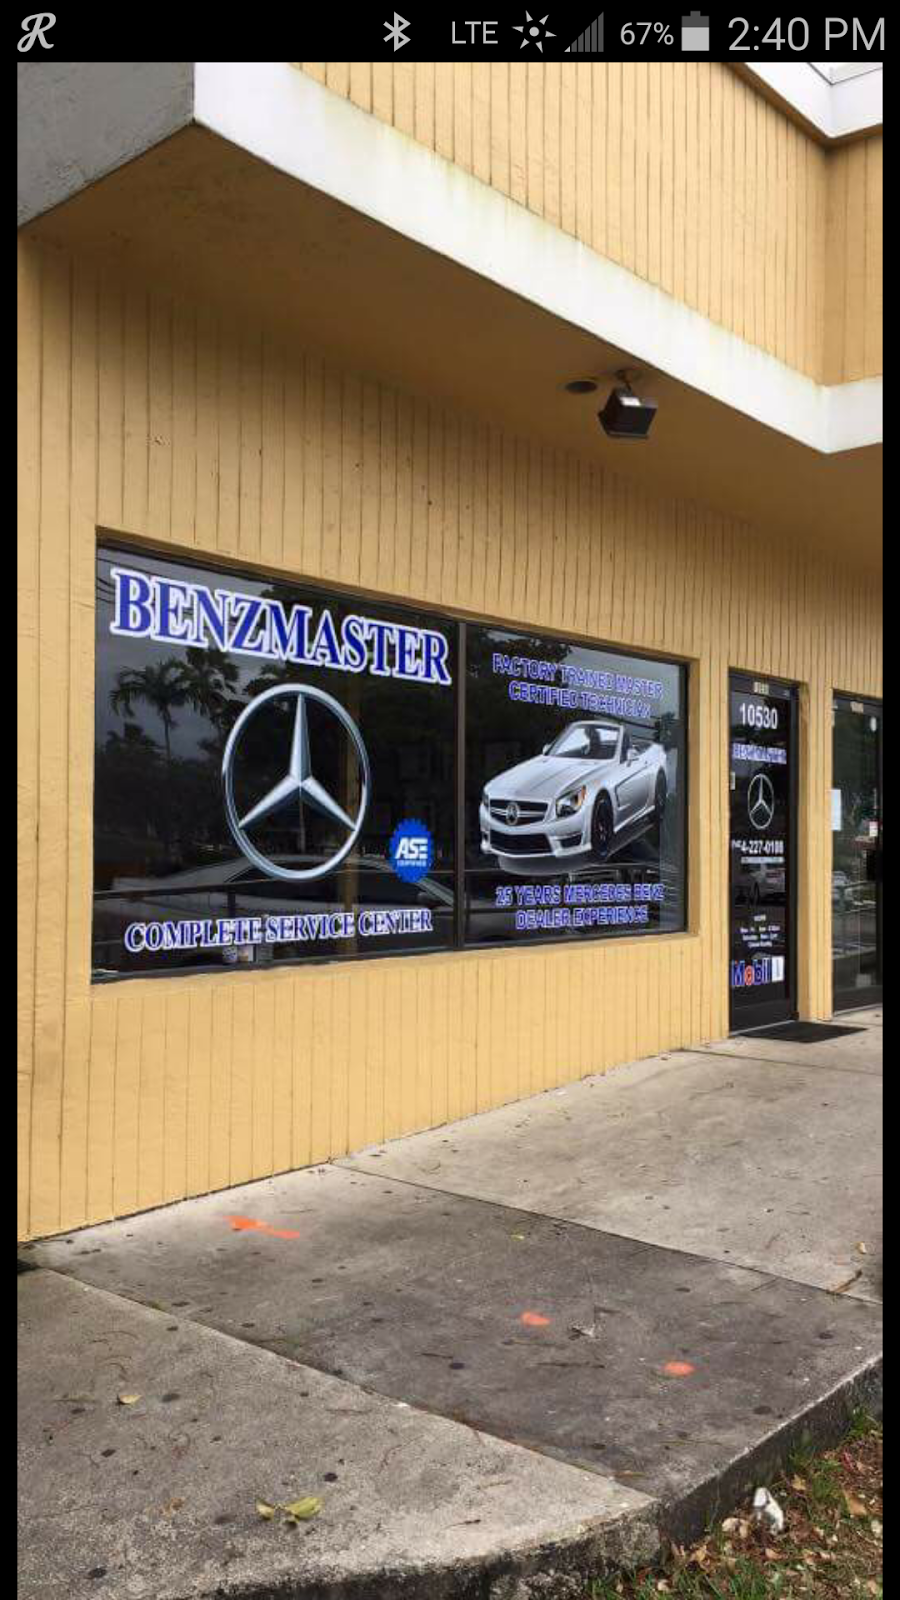 Benzmaster Mercedes Specialist | 10530 Wiles Rd, Coral Springs, FL 33076 | Phone: (954) 227-0108